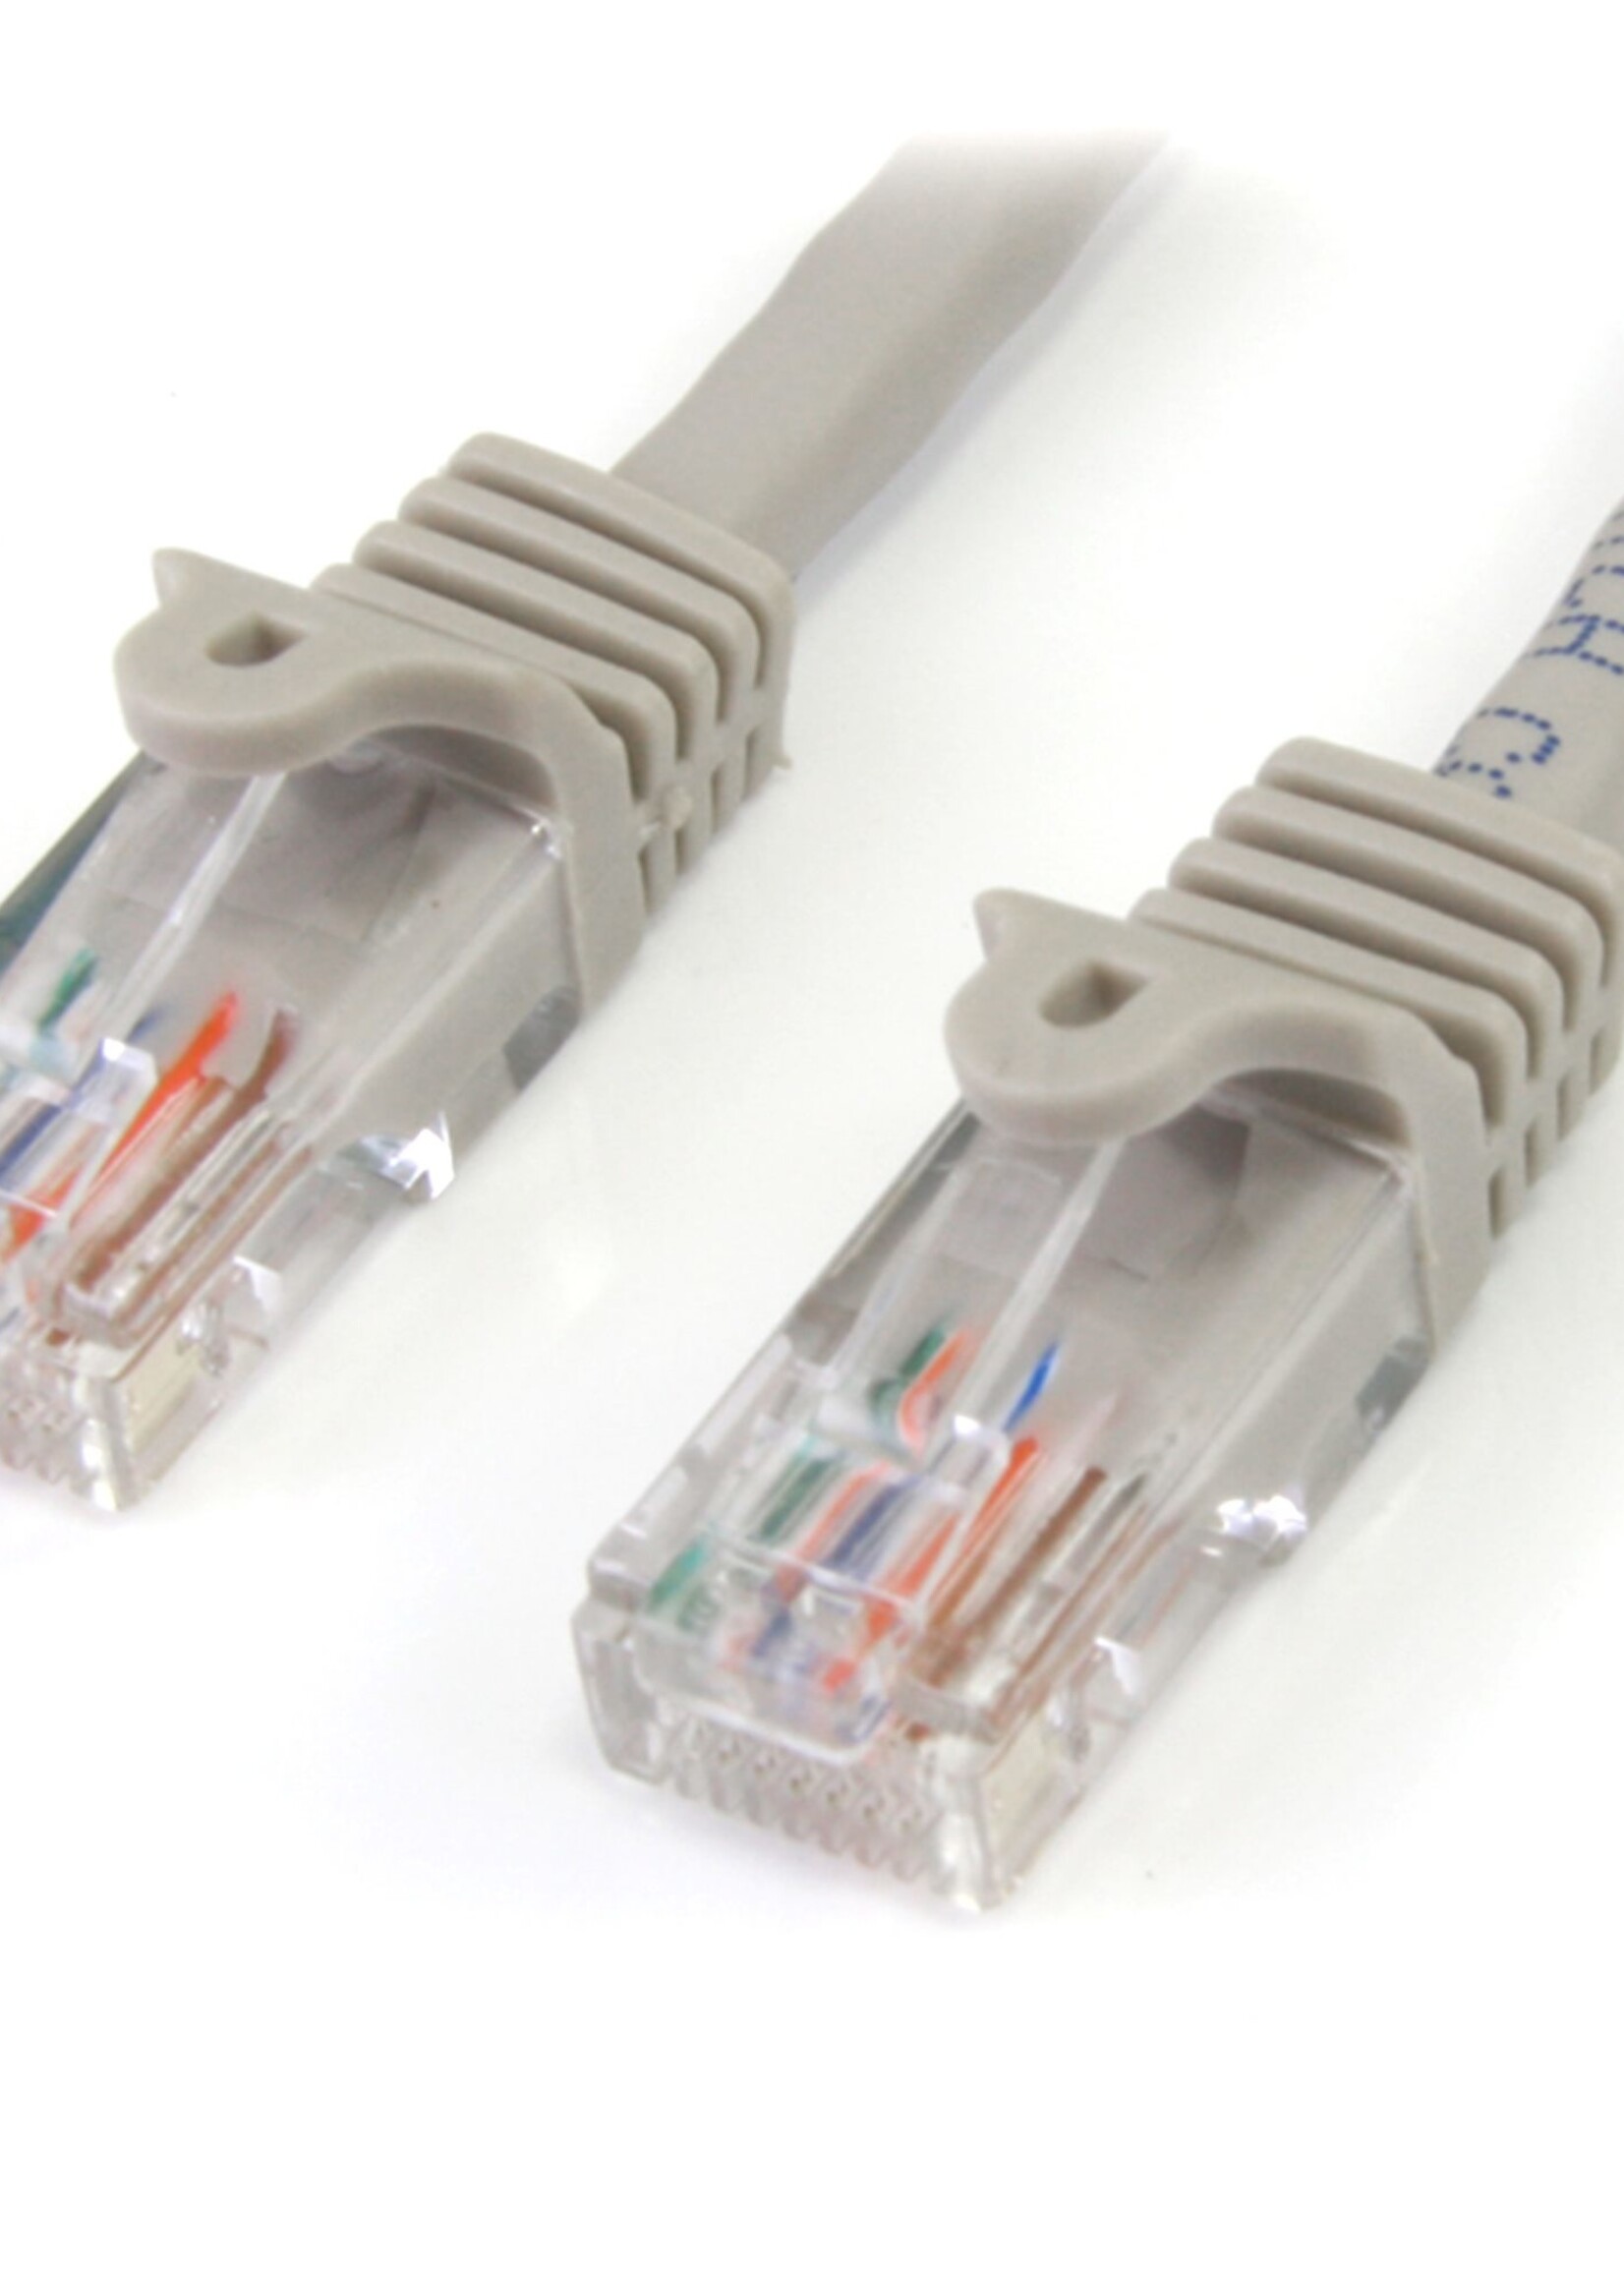 3m Gray Snagless UTP Cat5e Patch Cable